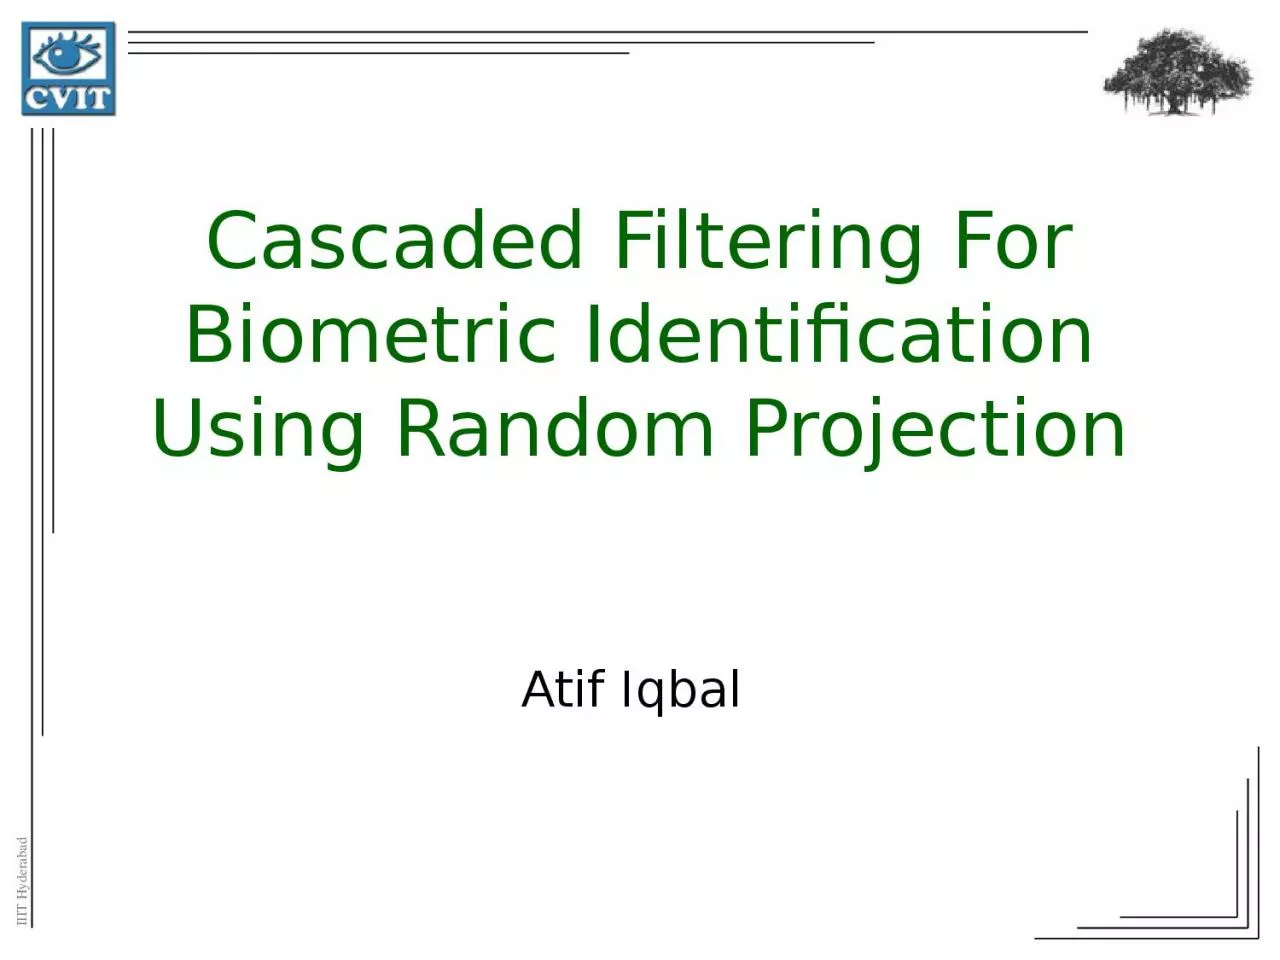 Cascaded Filtering For Biometric Identification Using Random Projection